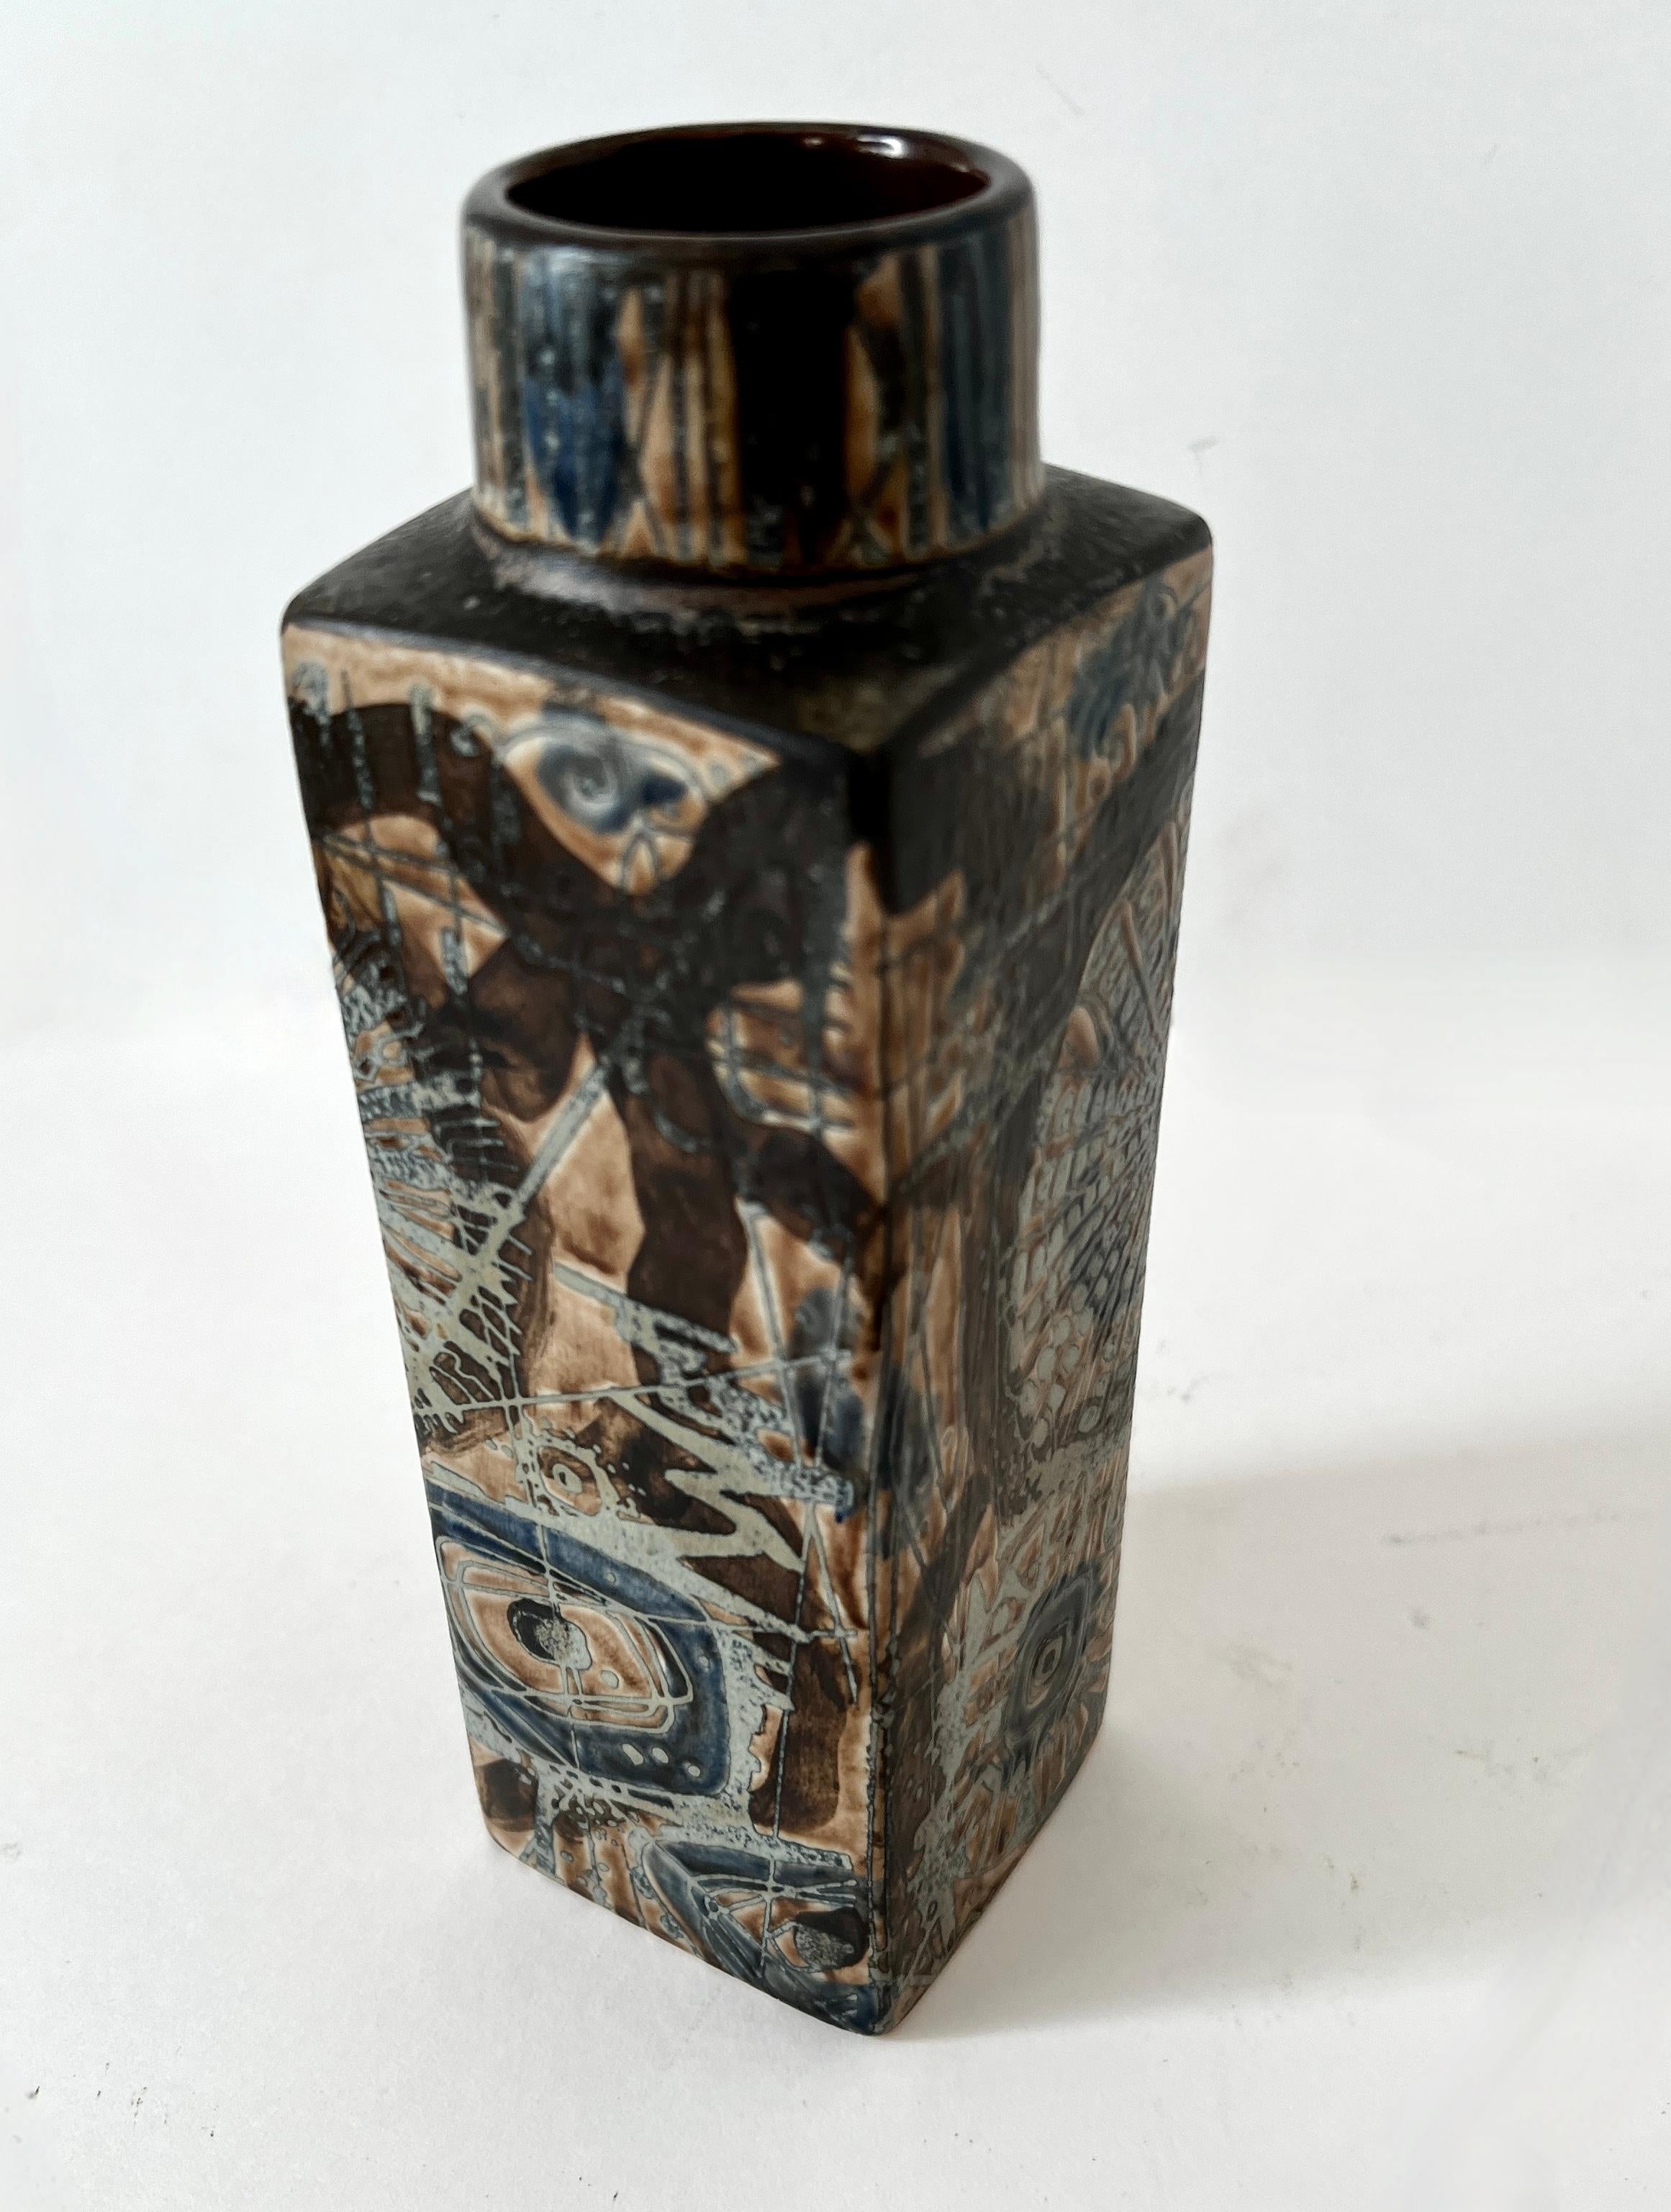 a wonderful square cylinder vase with a round top - the piece has been artistically desgined with a starburst and other artistic lines and forms.  A compliant to any desk, work station for cocktail table, bedside or console table. 

Ideal for the